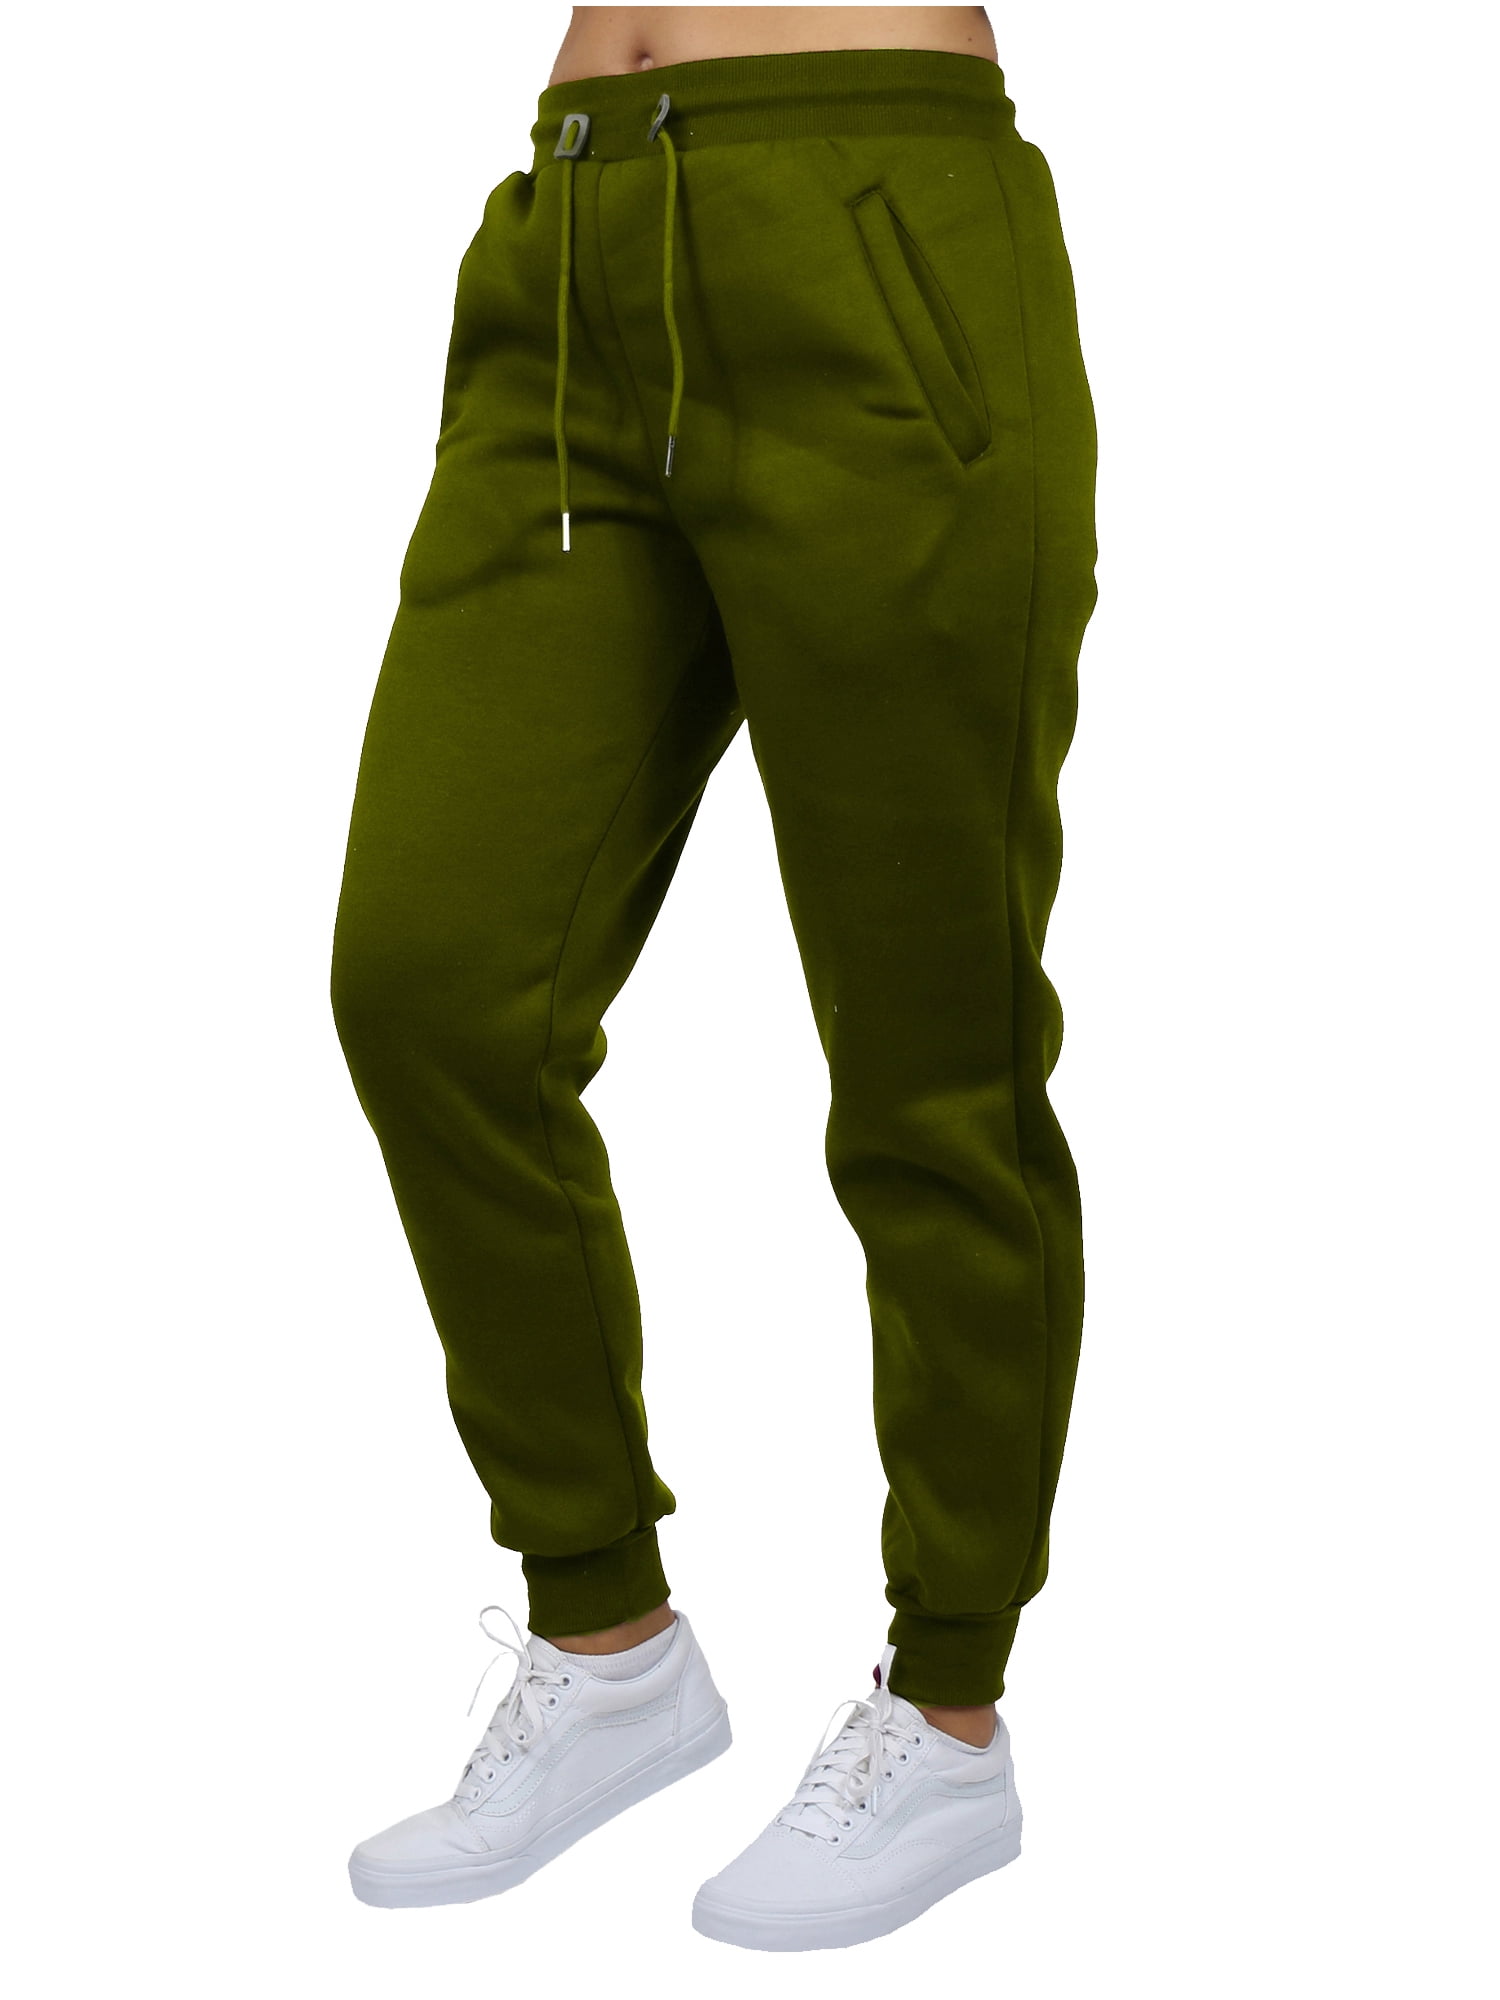 Olive Green Flare Sweatpants (Women) – PSYCH Online Store